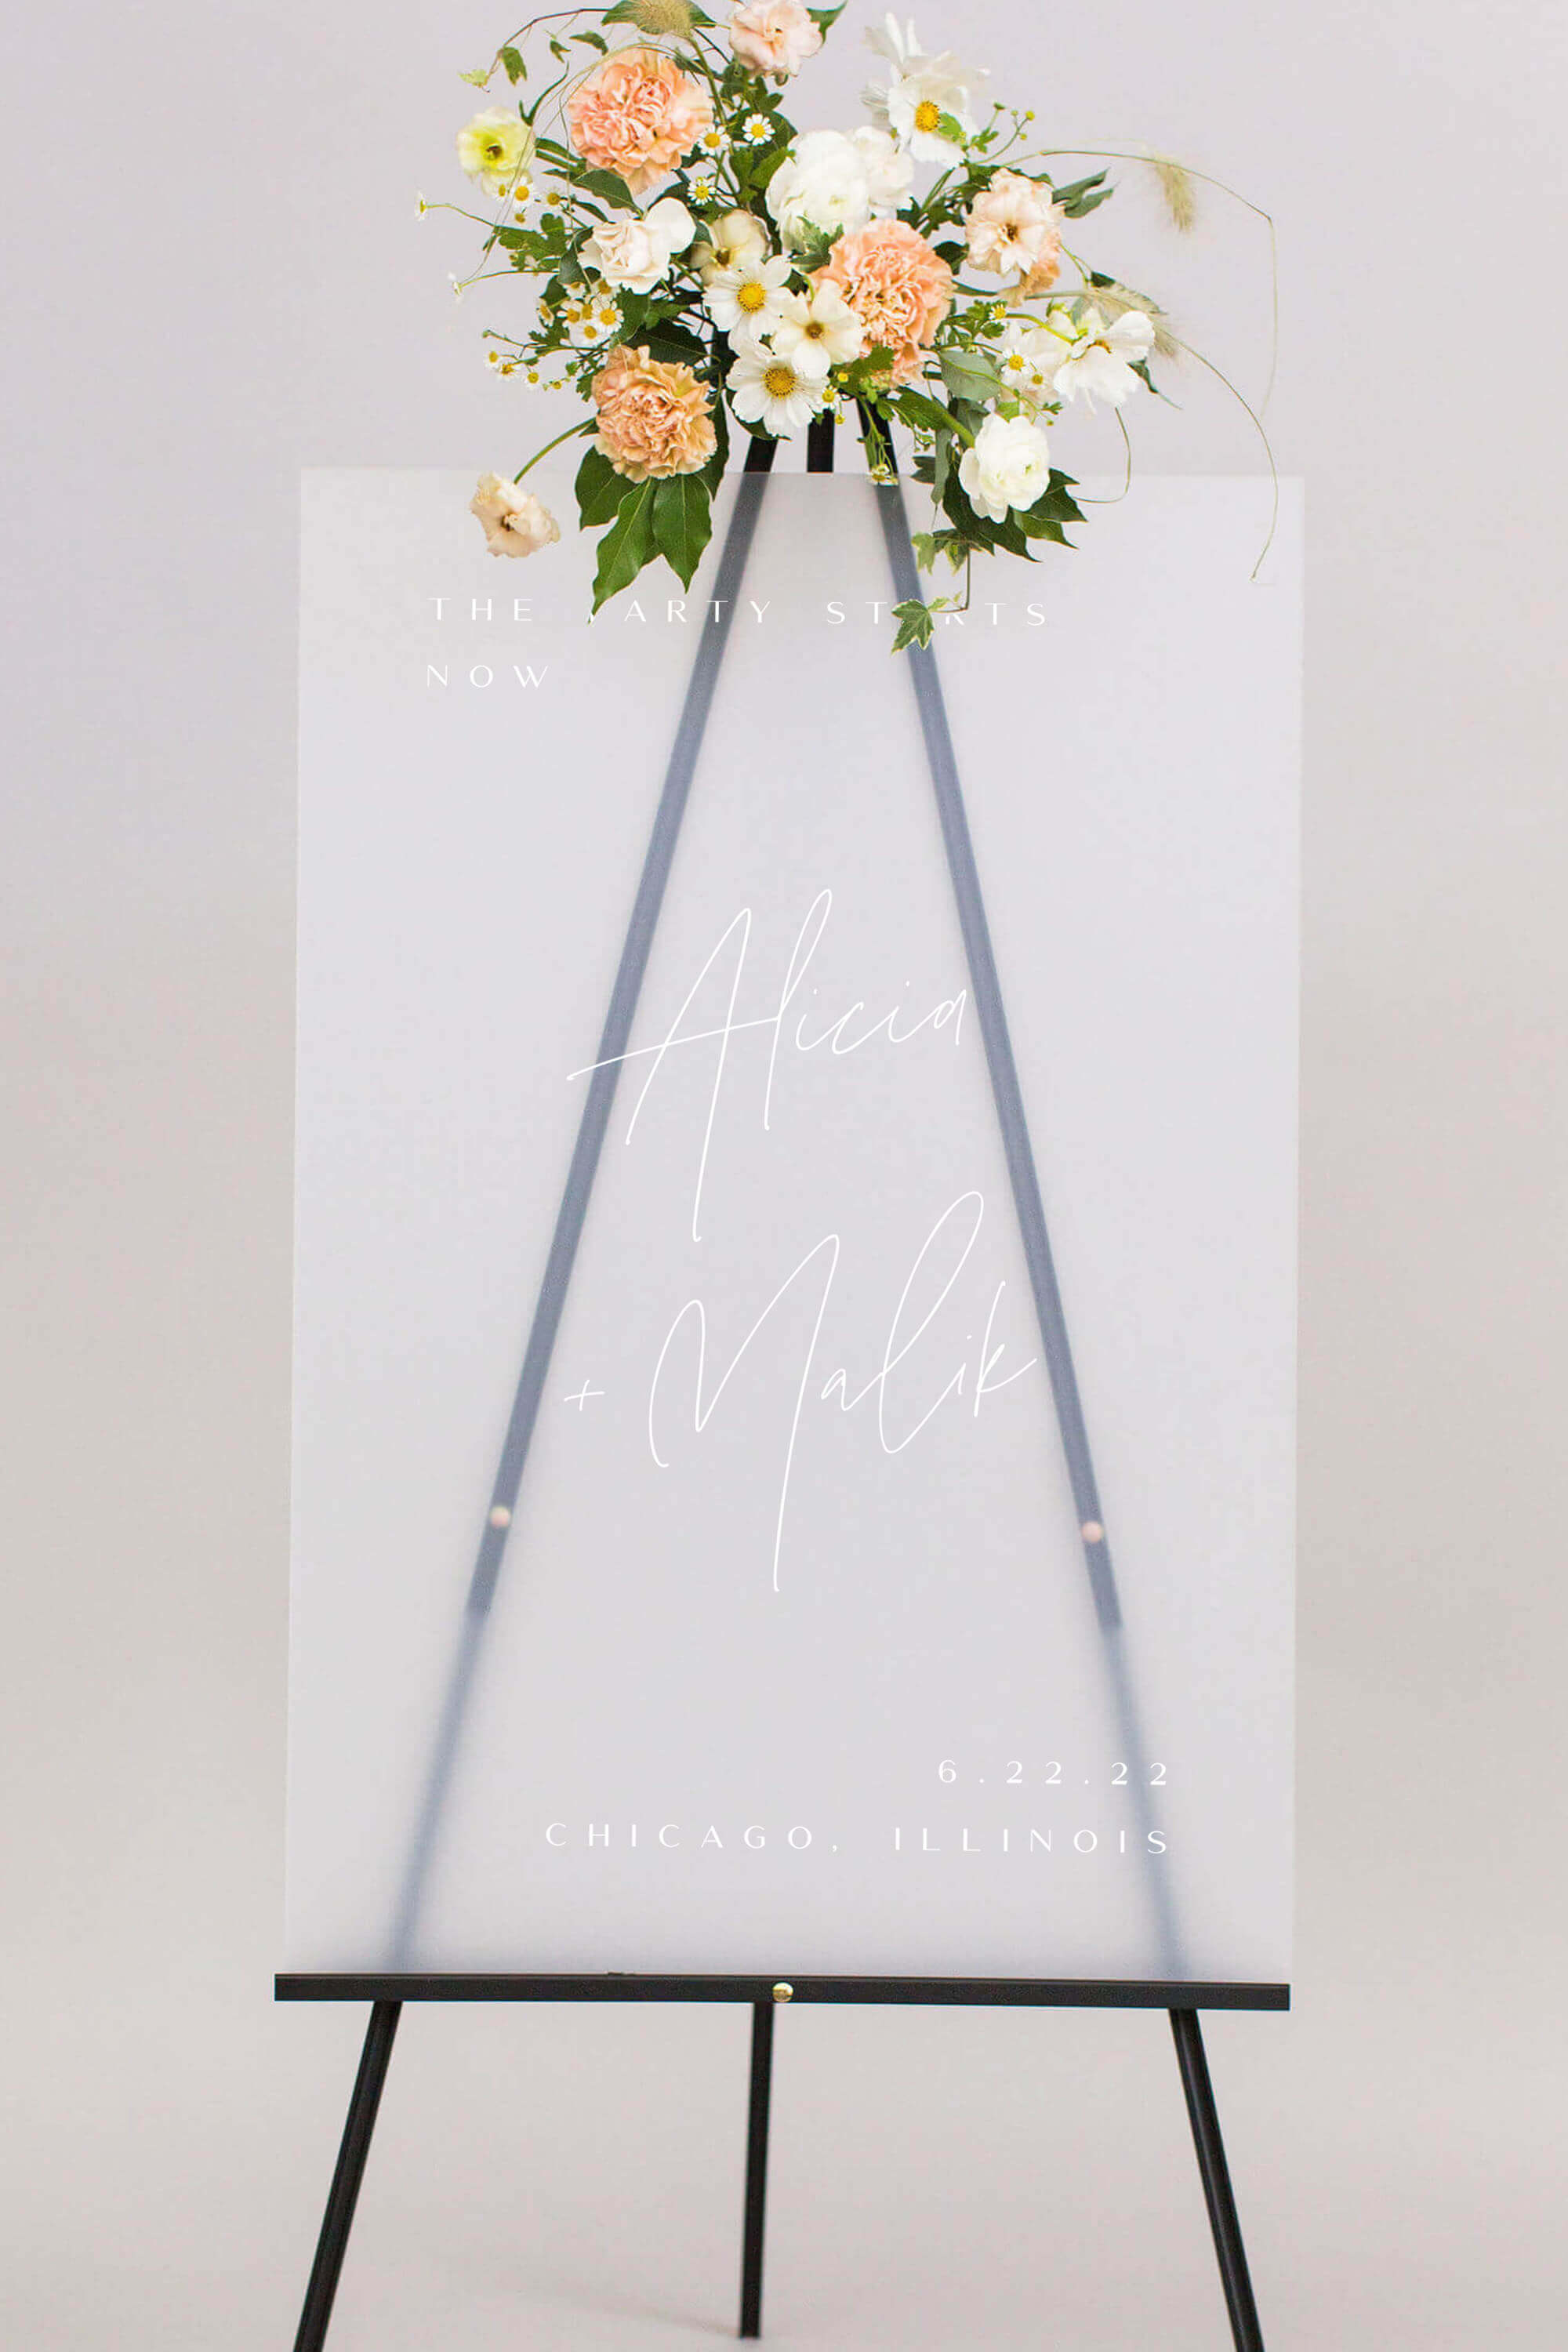 Frosted Acrylic Wedding Welcome Board Lily Roe Co.